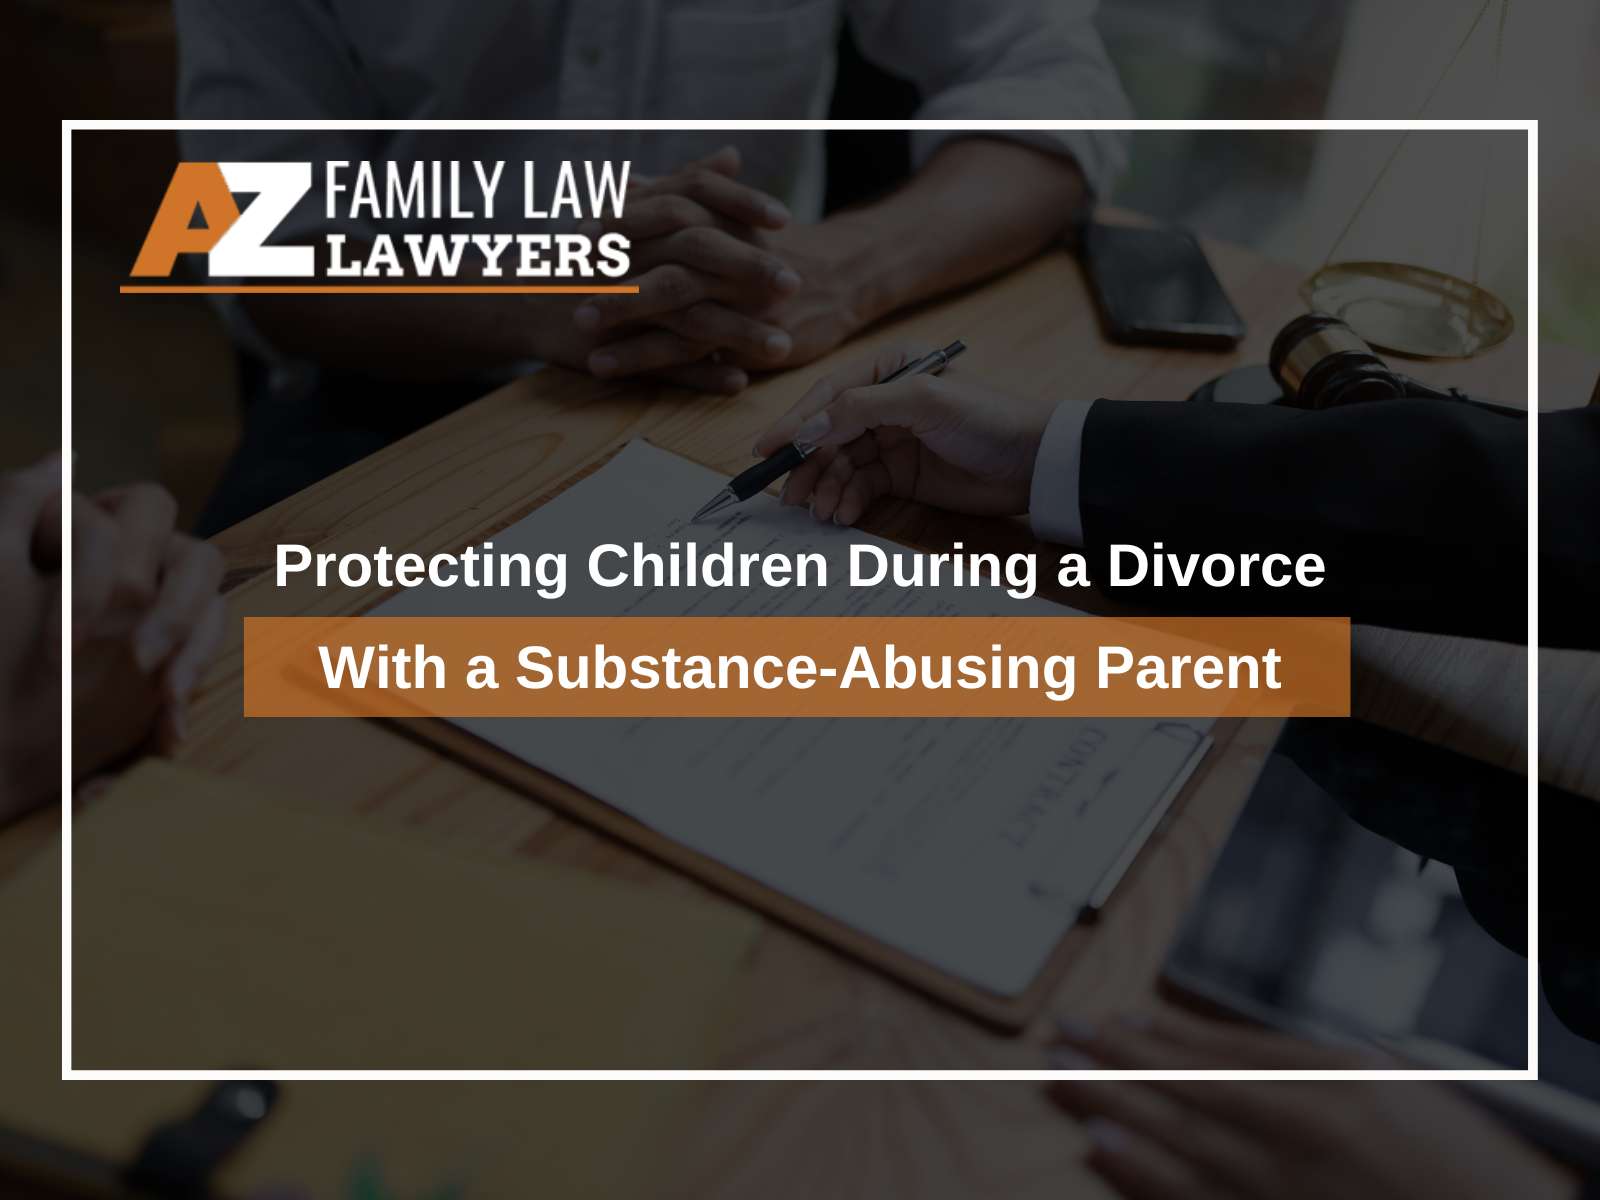 Protecting Children During a Divorce With a Substance-Abusing Parent